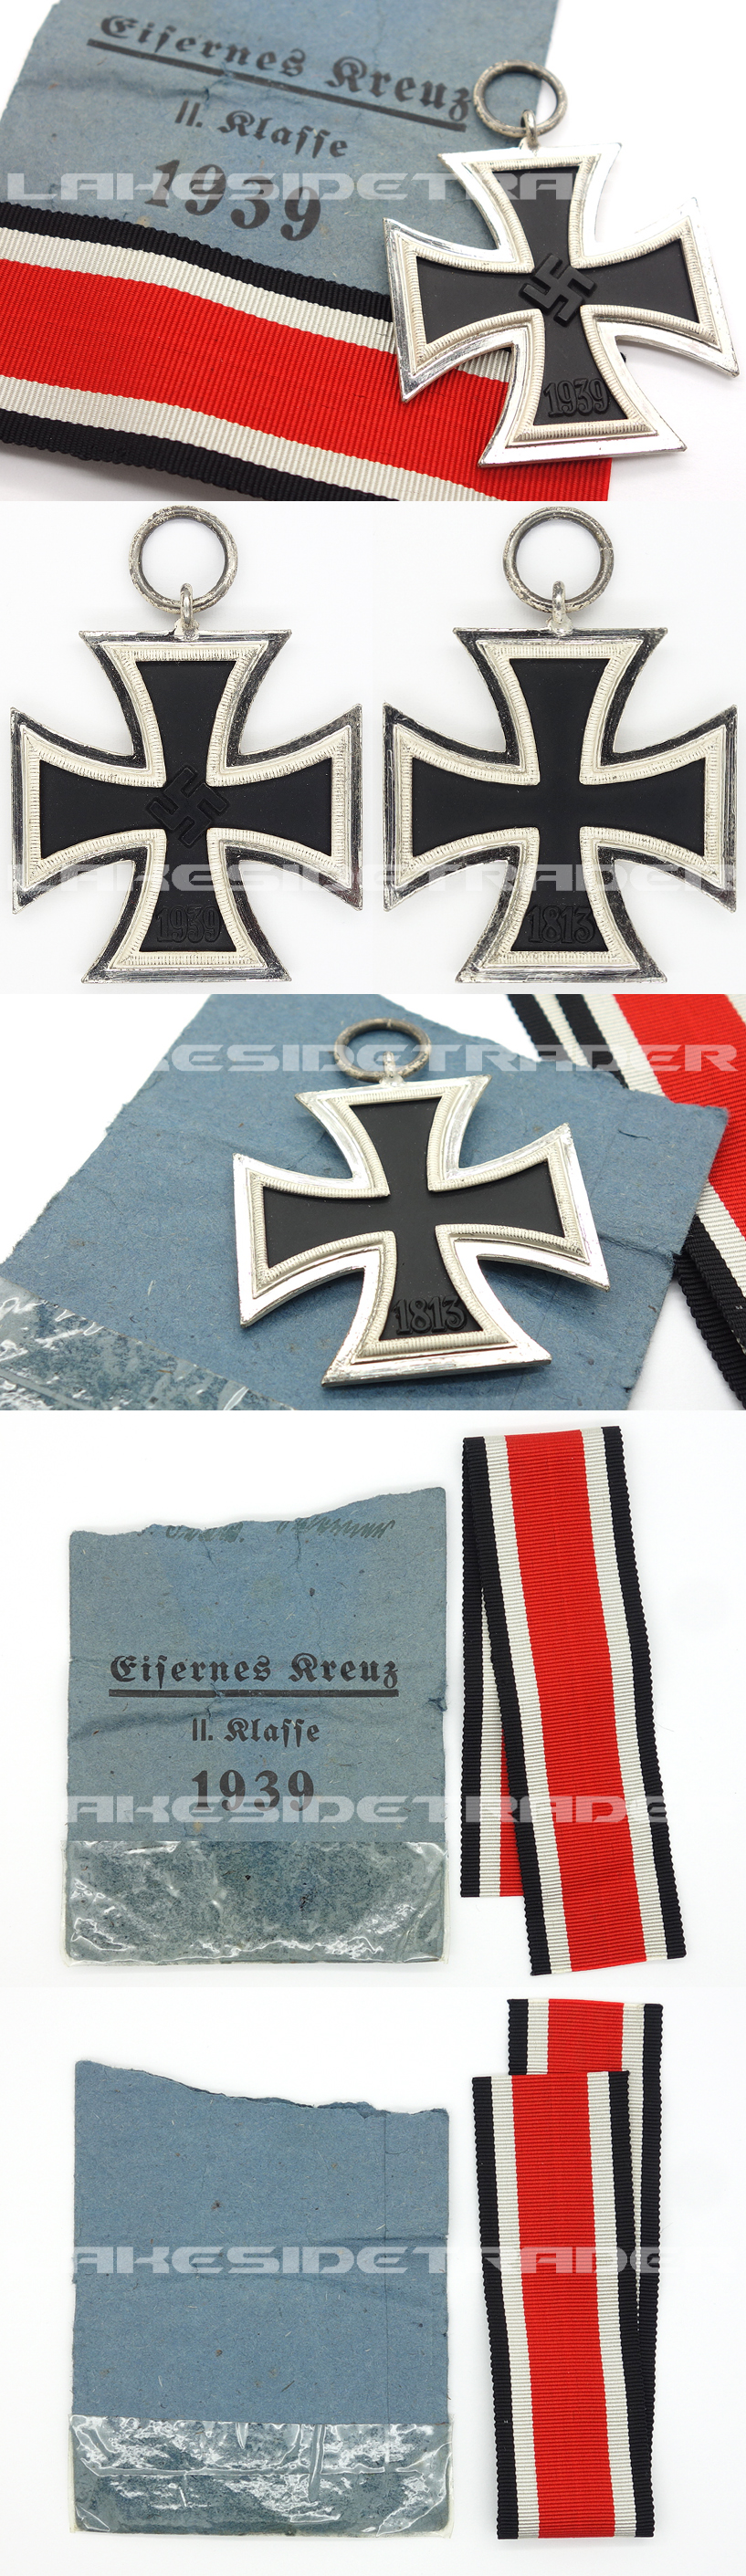 2nd Class Iron Cross in Issue Packet by R. Wagner & Lange